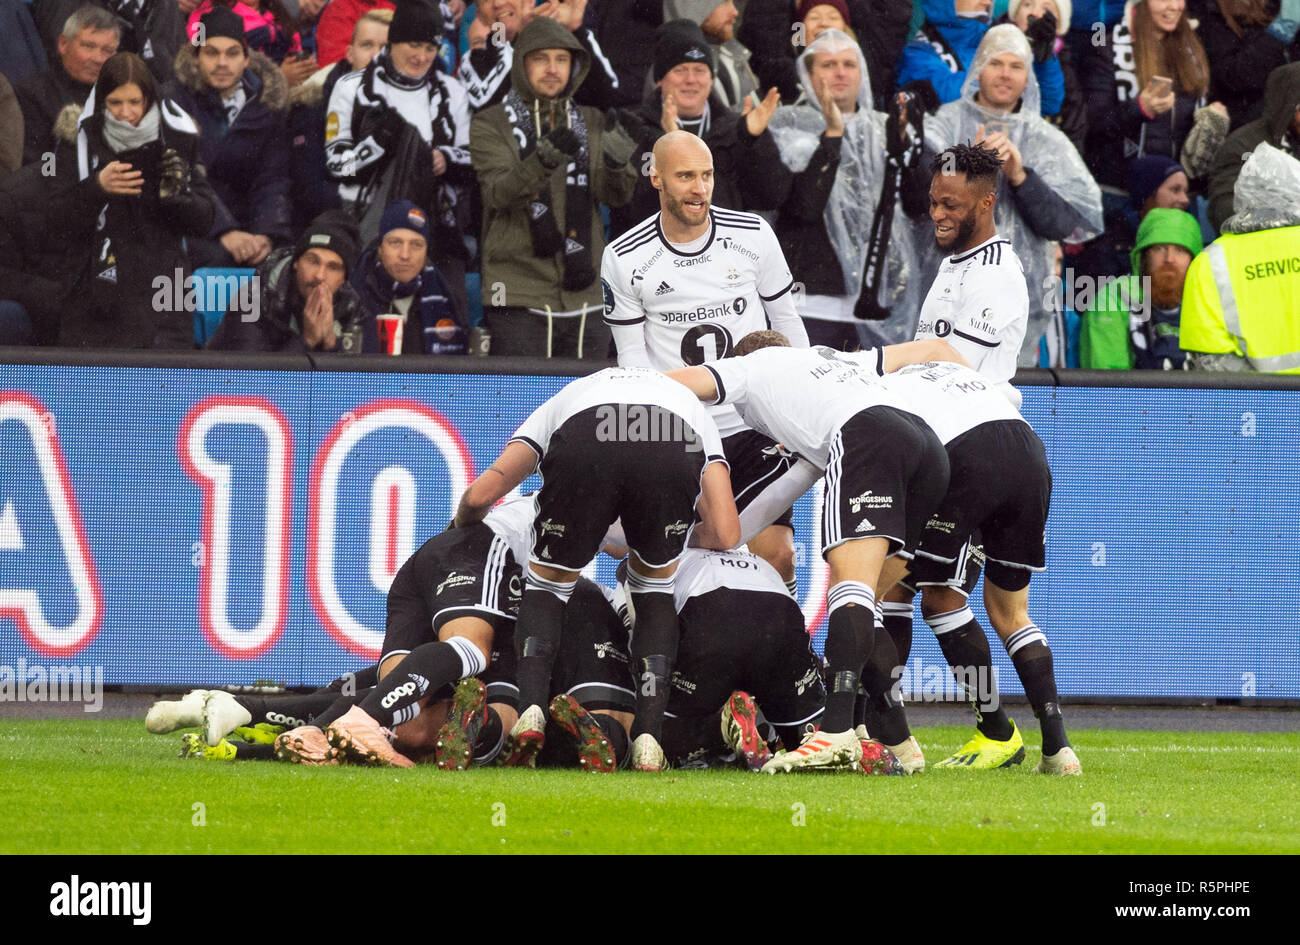 Norway, Oslo. 2nd Dec 2018. The Rosenborg players celebrate a goal during the Norwegian Cup Final 2018 between Rosenborg and Strømsgodset at Ullevaal Stadion in Oslo. (Photo credit: Gonzales Photo - Jan-Erik Eriksen). Credit: Gonzales Photo/Alamy Live News Stock Photo